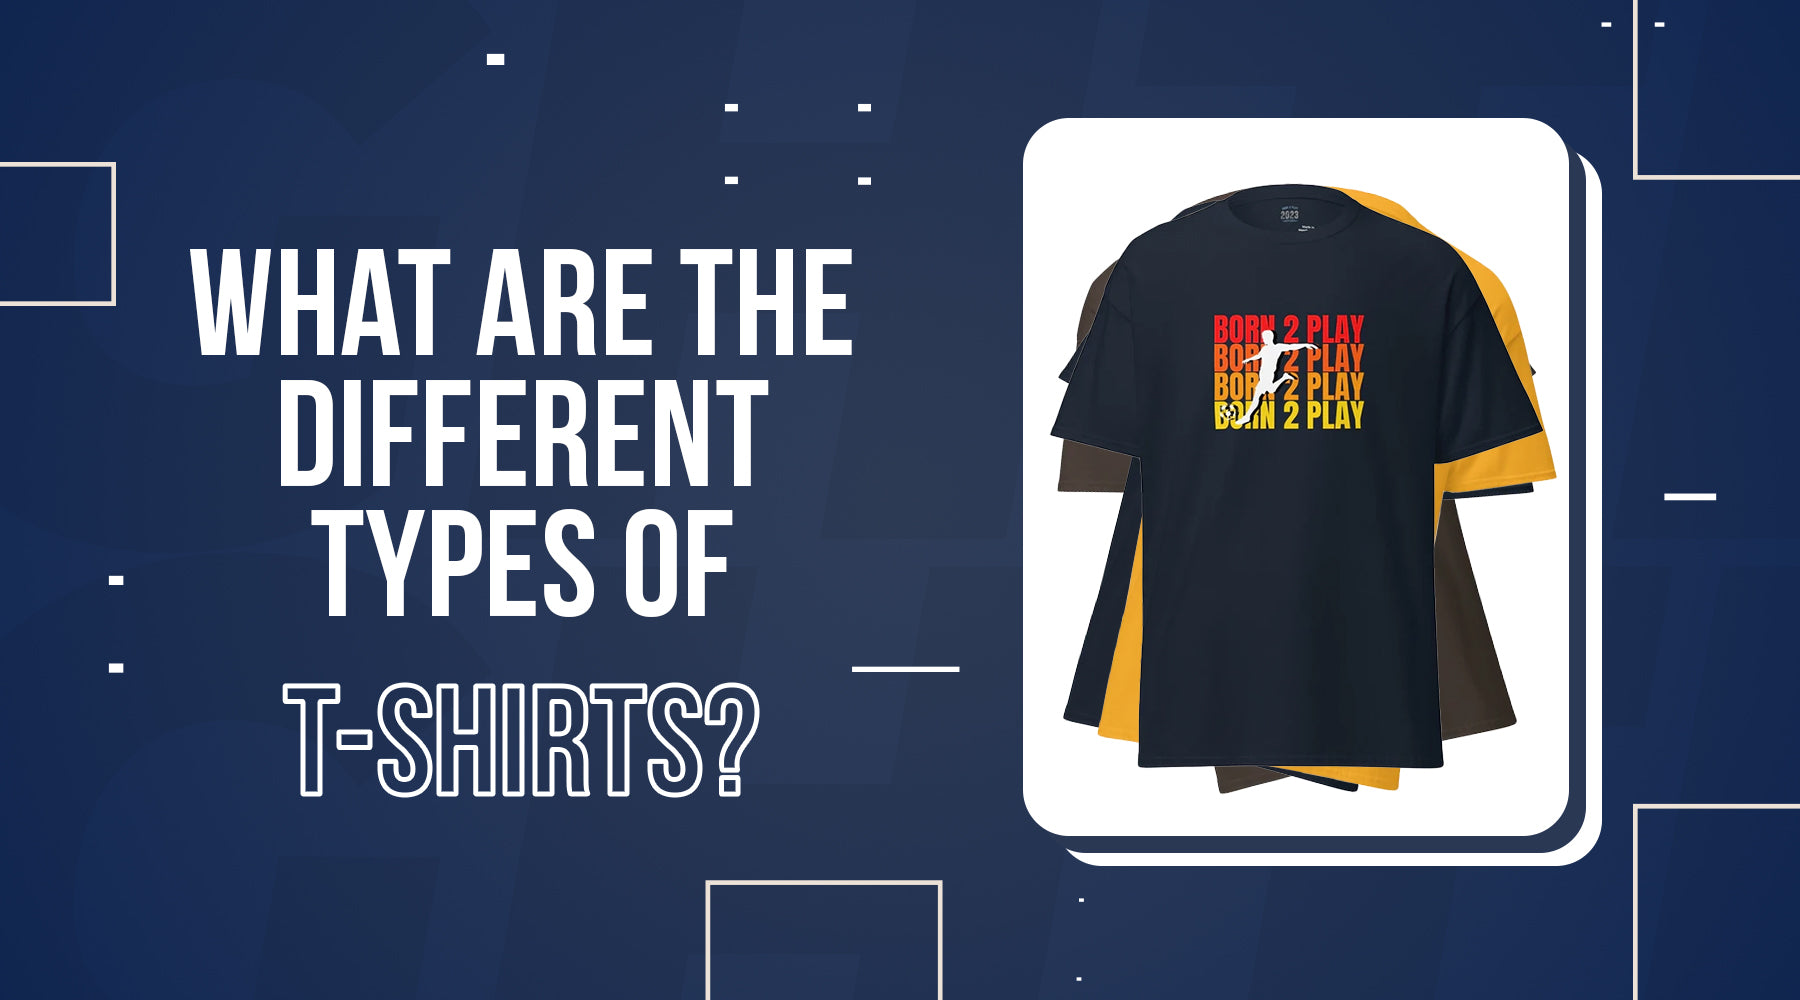 WHAT ARE THE DIFFERENT TYPES OF T-Shirts